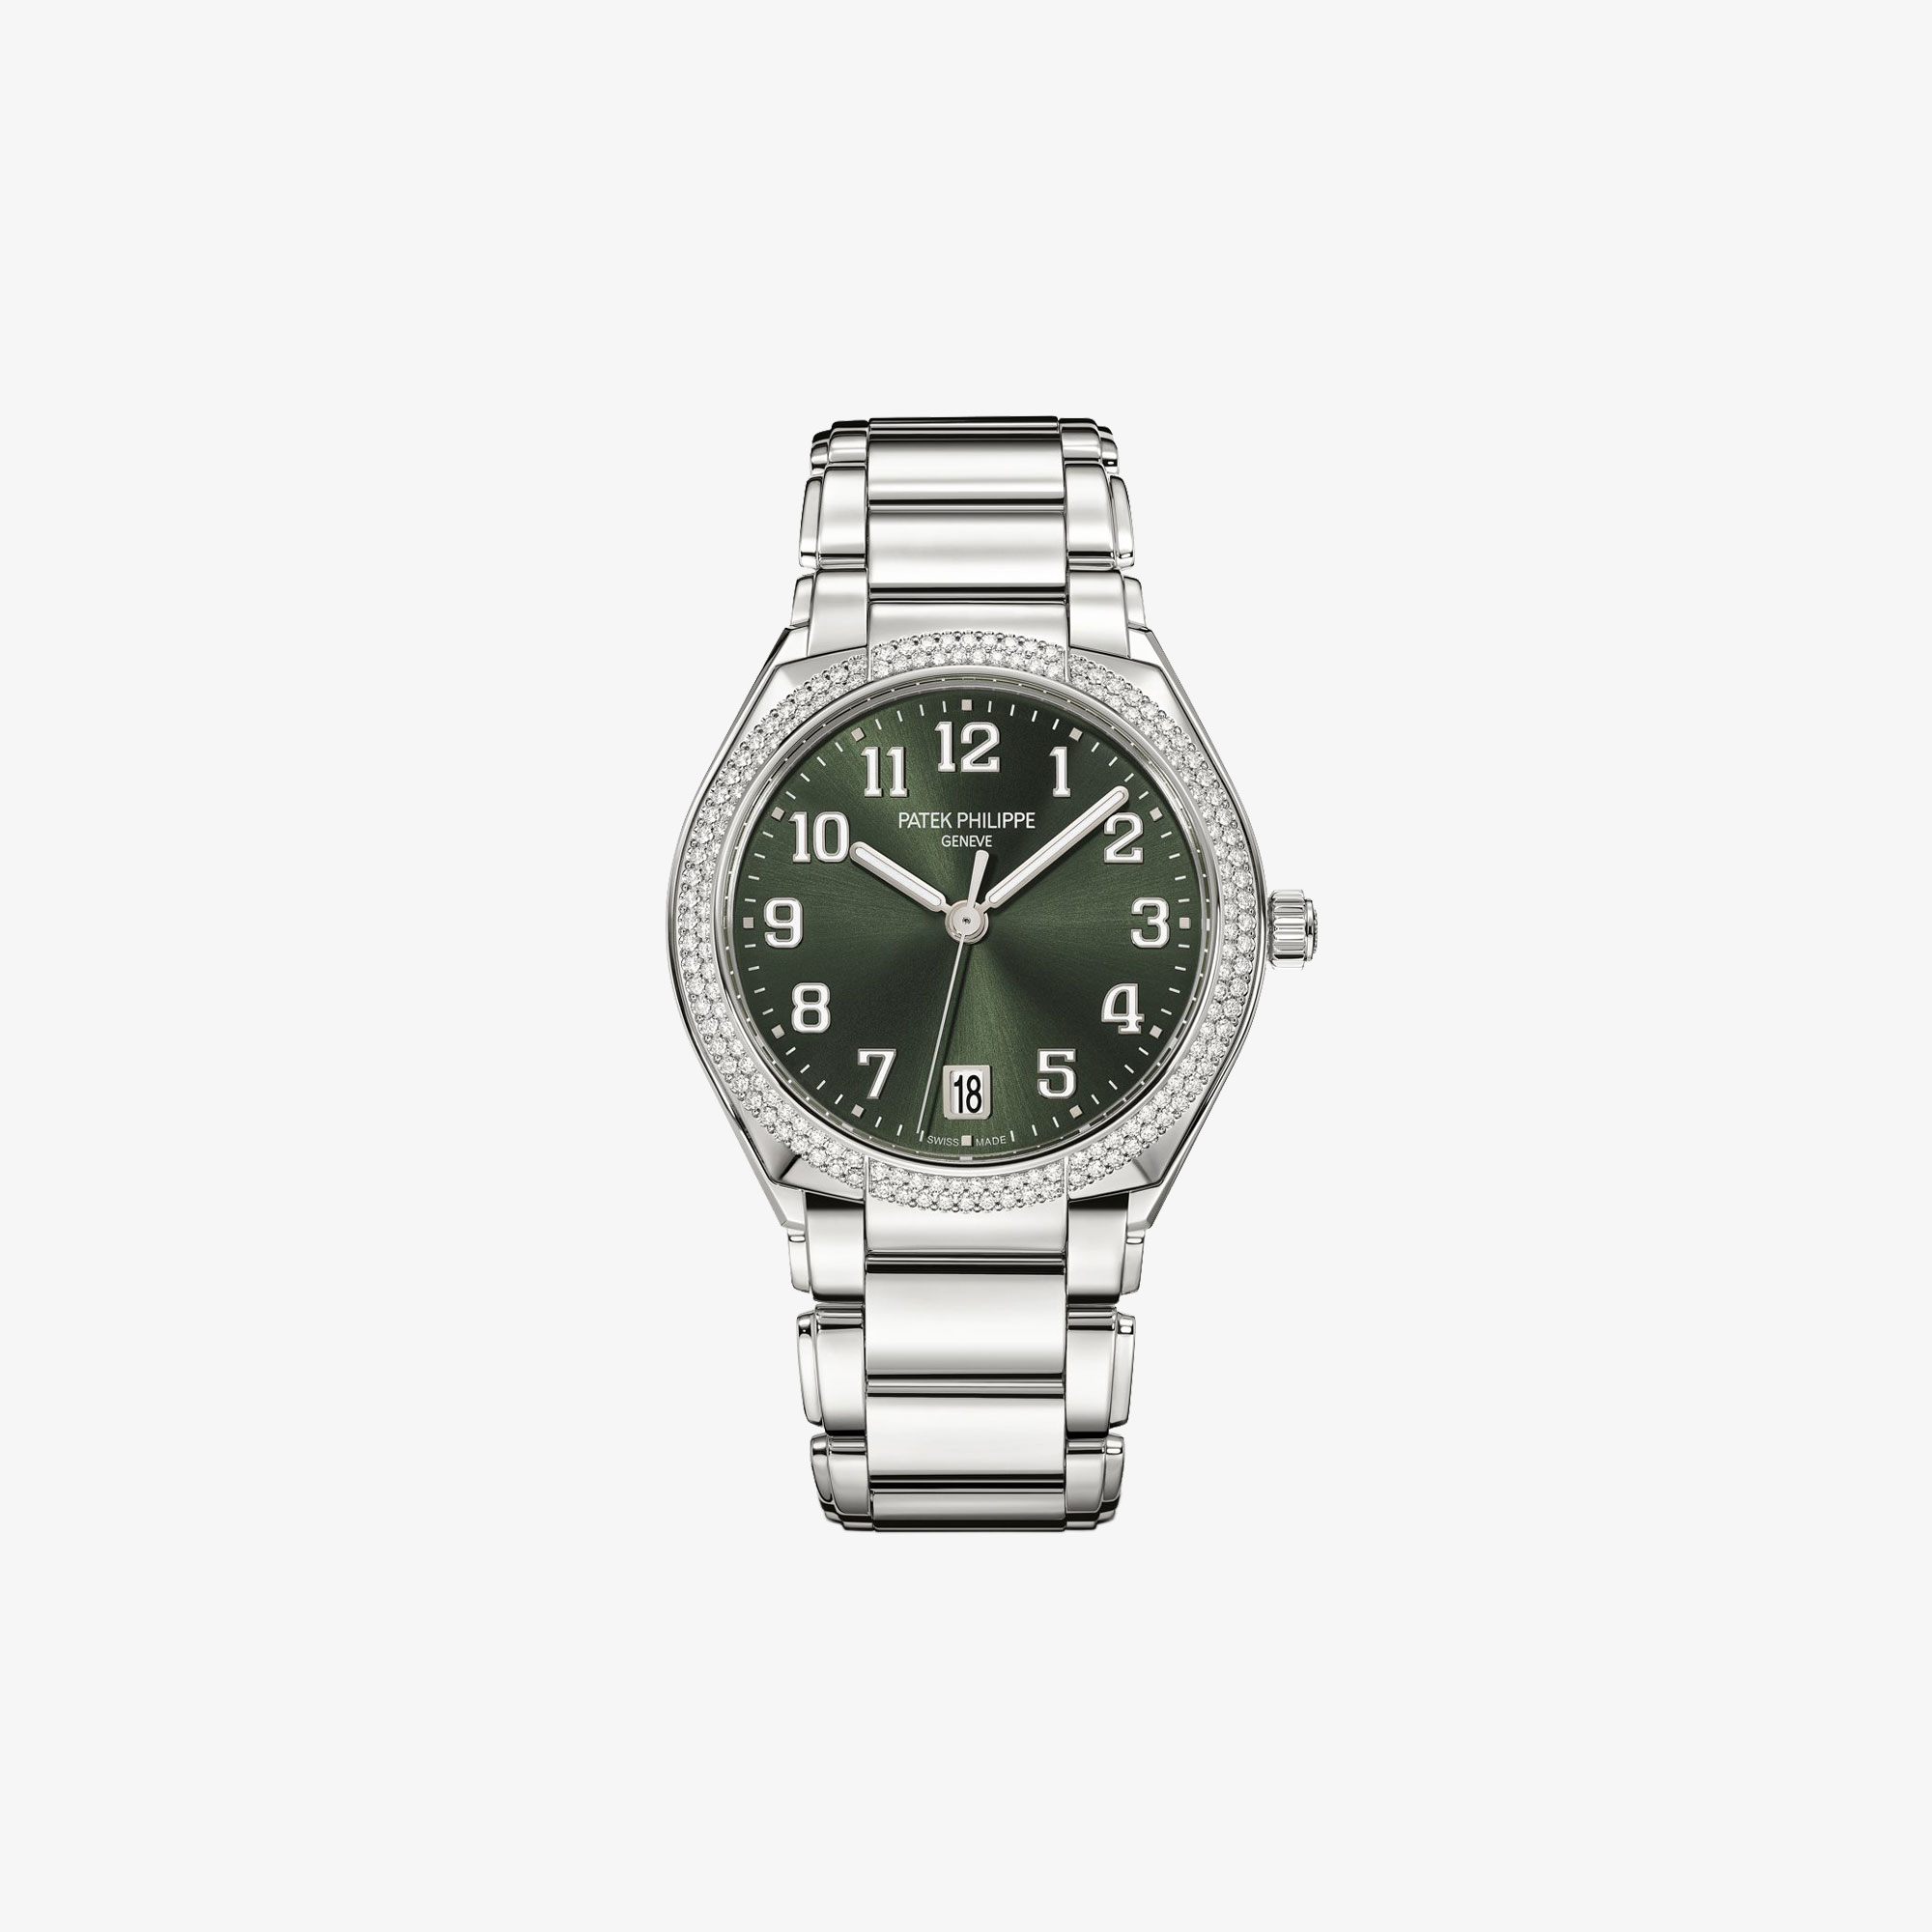 PATEK PHLIPPE TWENTY~4 AUTOMATIC WITH DIAL IN OLIVE-GREEN